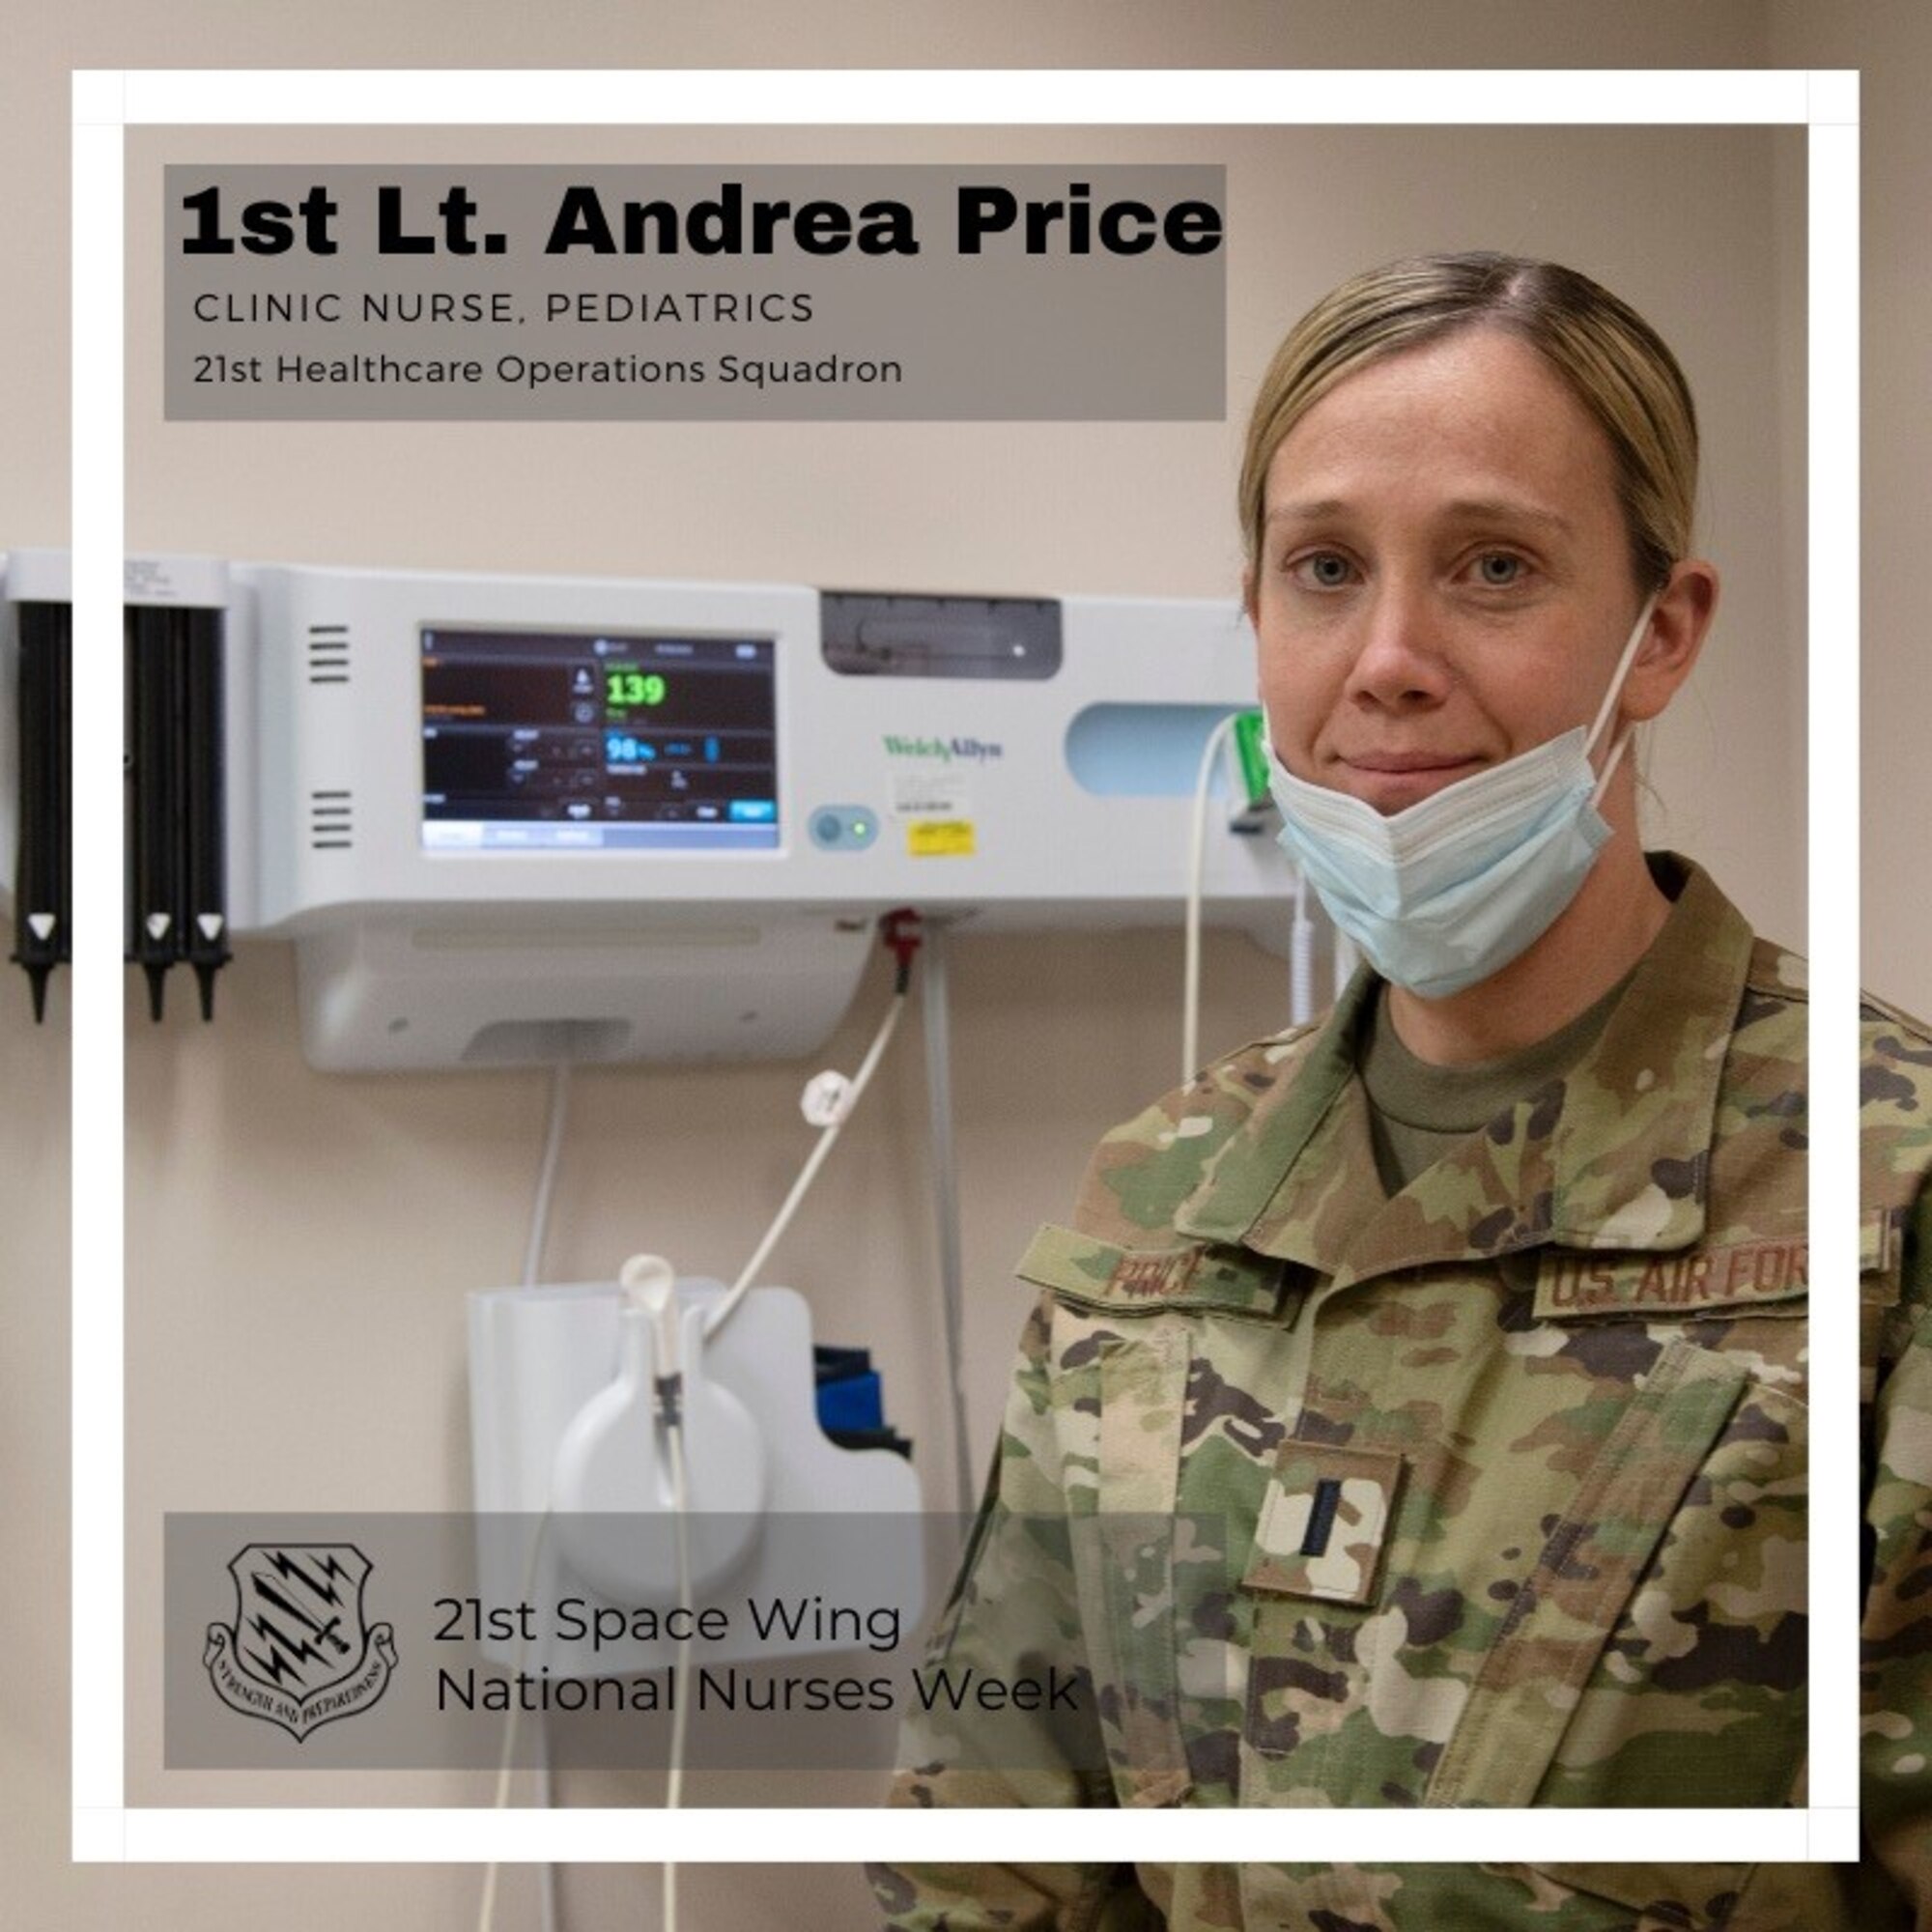 PETERSON AIR FORCE BASE, Colo. – 1st Lt. Andrea Price, 21st Medical Group pediatric nurse, was inspired by her parents who are also medical professionals, and became a commissioned nurse last year after serving 15 years as an enlisted Air Force independent duty medical technician. Price comes from a generation of family members in the medical career field. Her mother was a nurse and her father was a lab technician. Price is from Weatherford, Oklahoma. (U.S. Air Force graphic by Staff Sgt. Alexandra M. Longfellow)